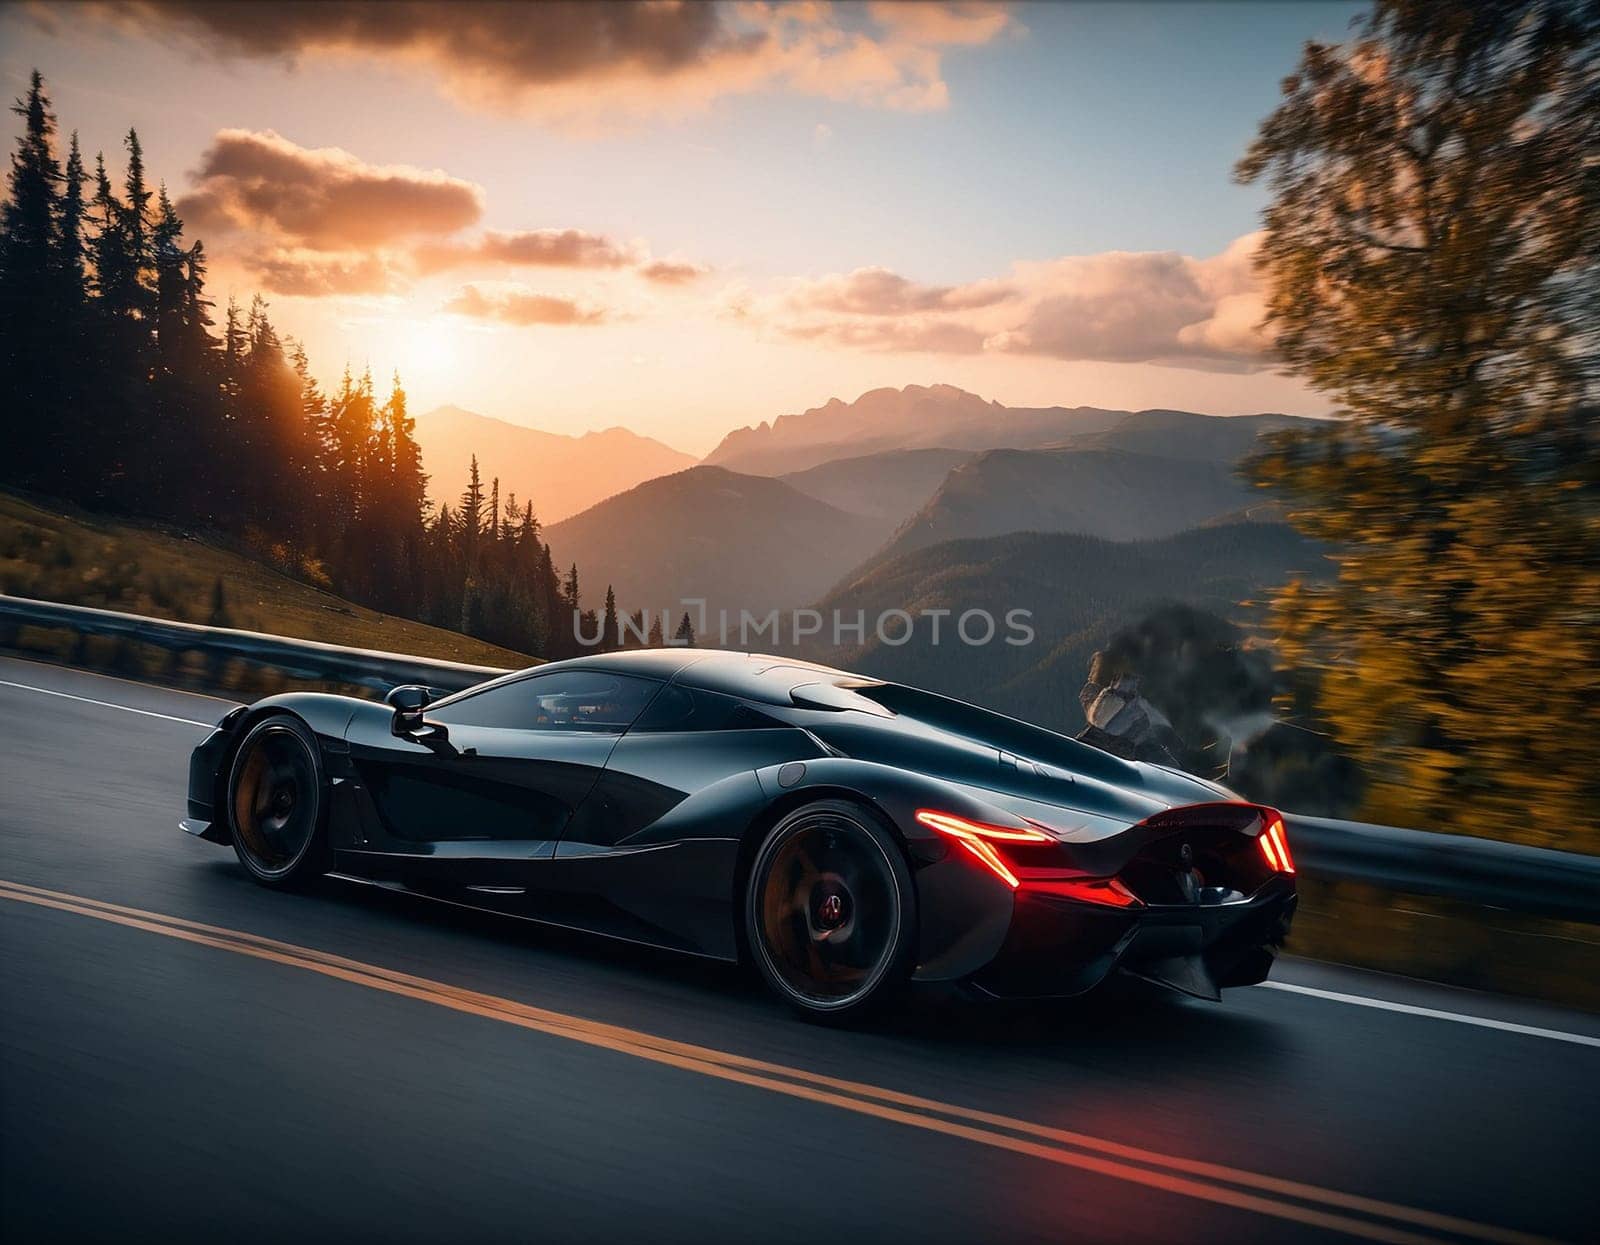 A sports car in the mountains.Sunset by NeuroSky